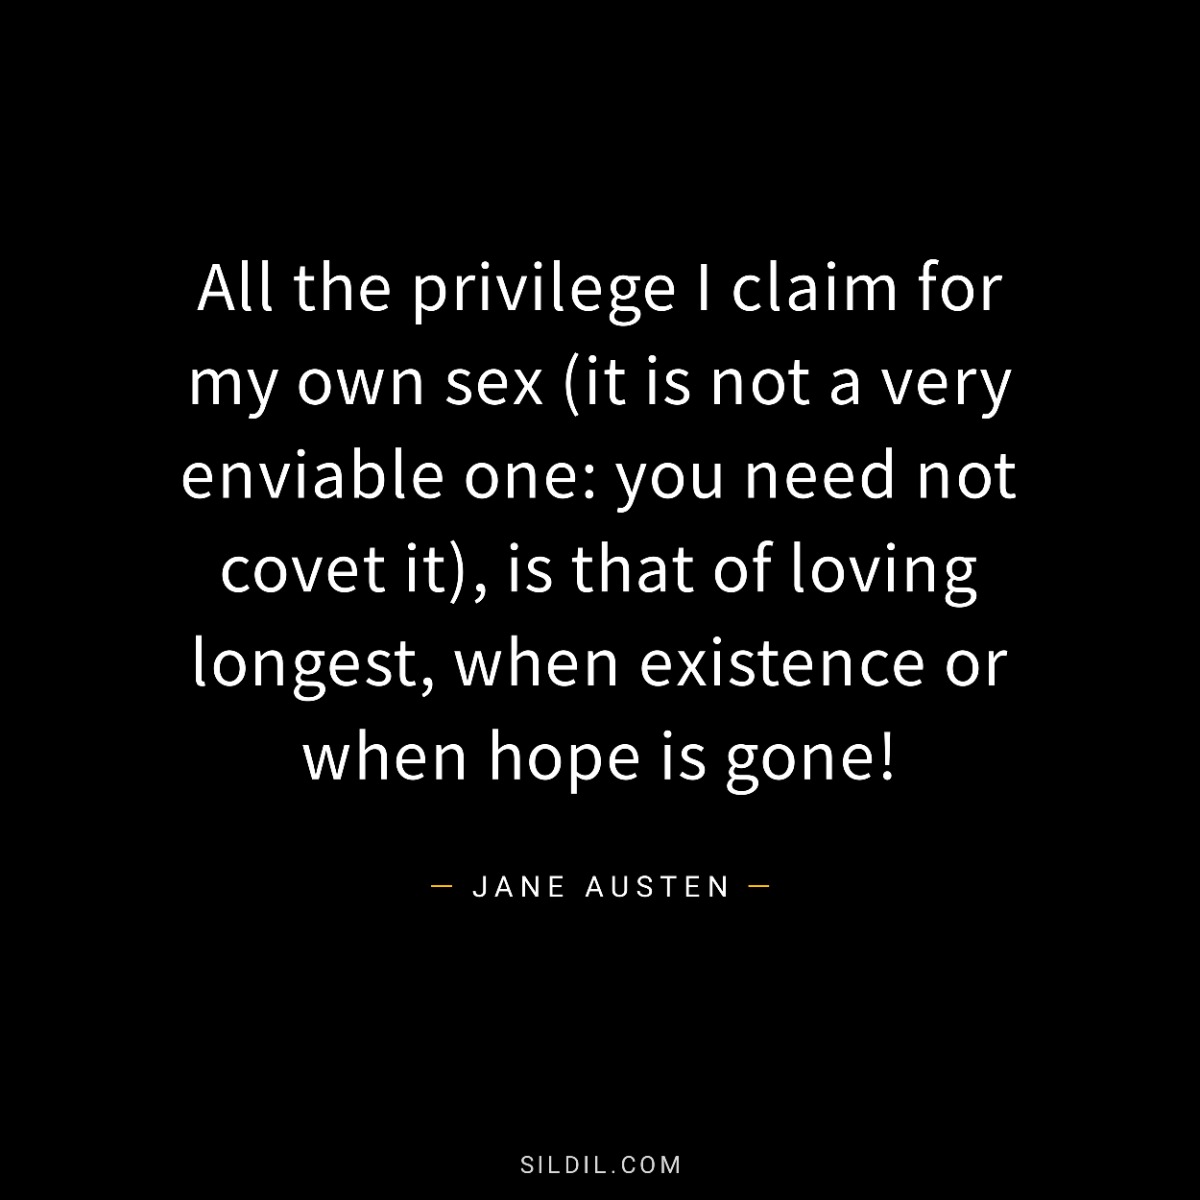 All the privilege I claim for my own sex (it is not a very enviable one: you need not covet it), is that of loving longest, when existence or when hope is gone!